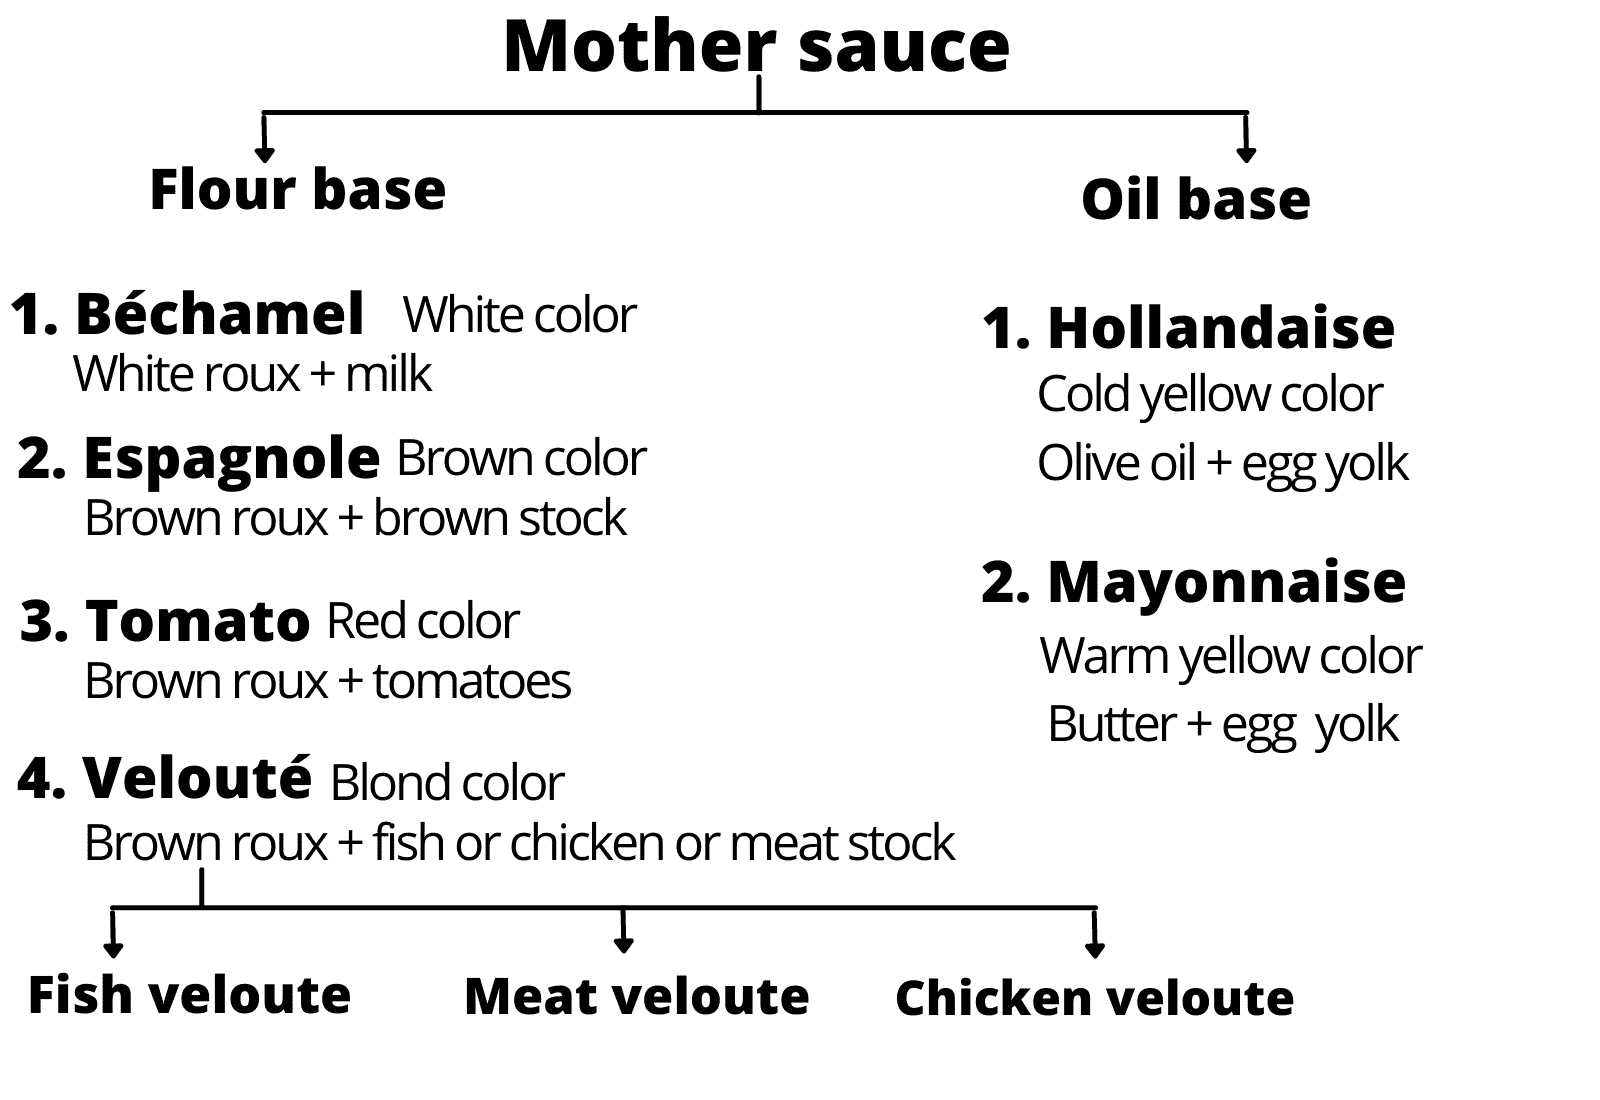 Mother sauce and derivative sauces